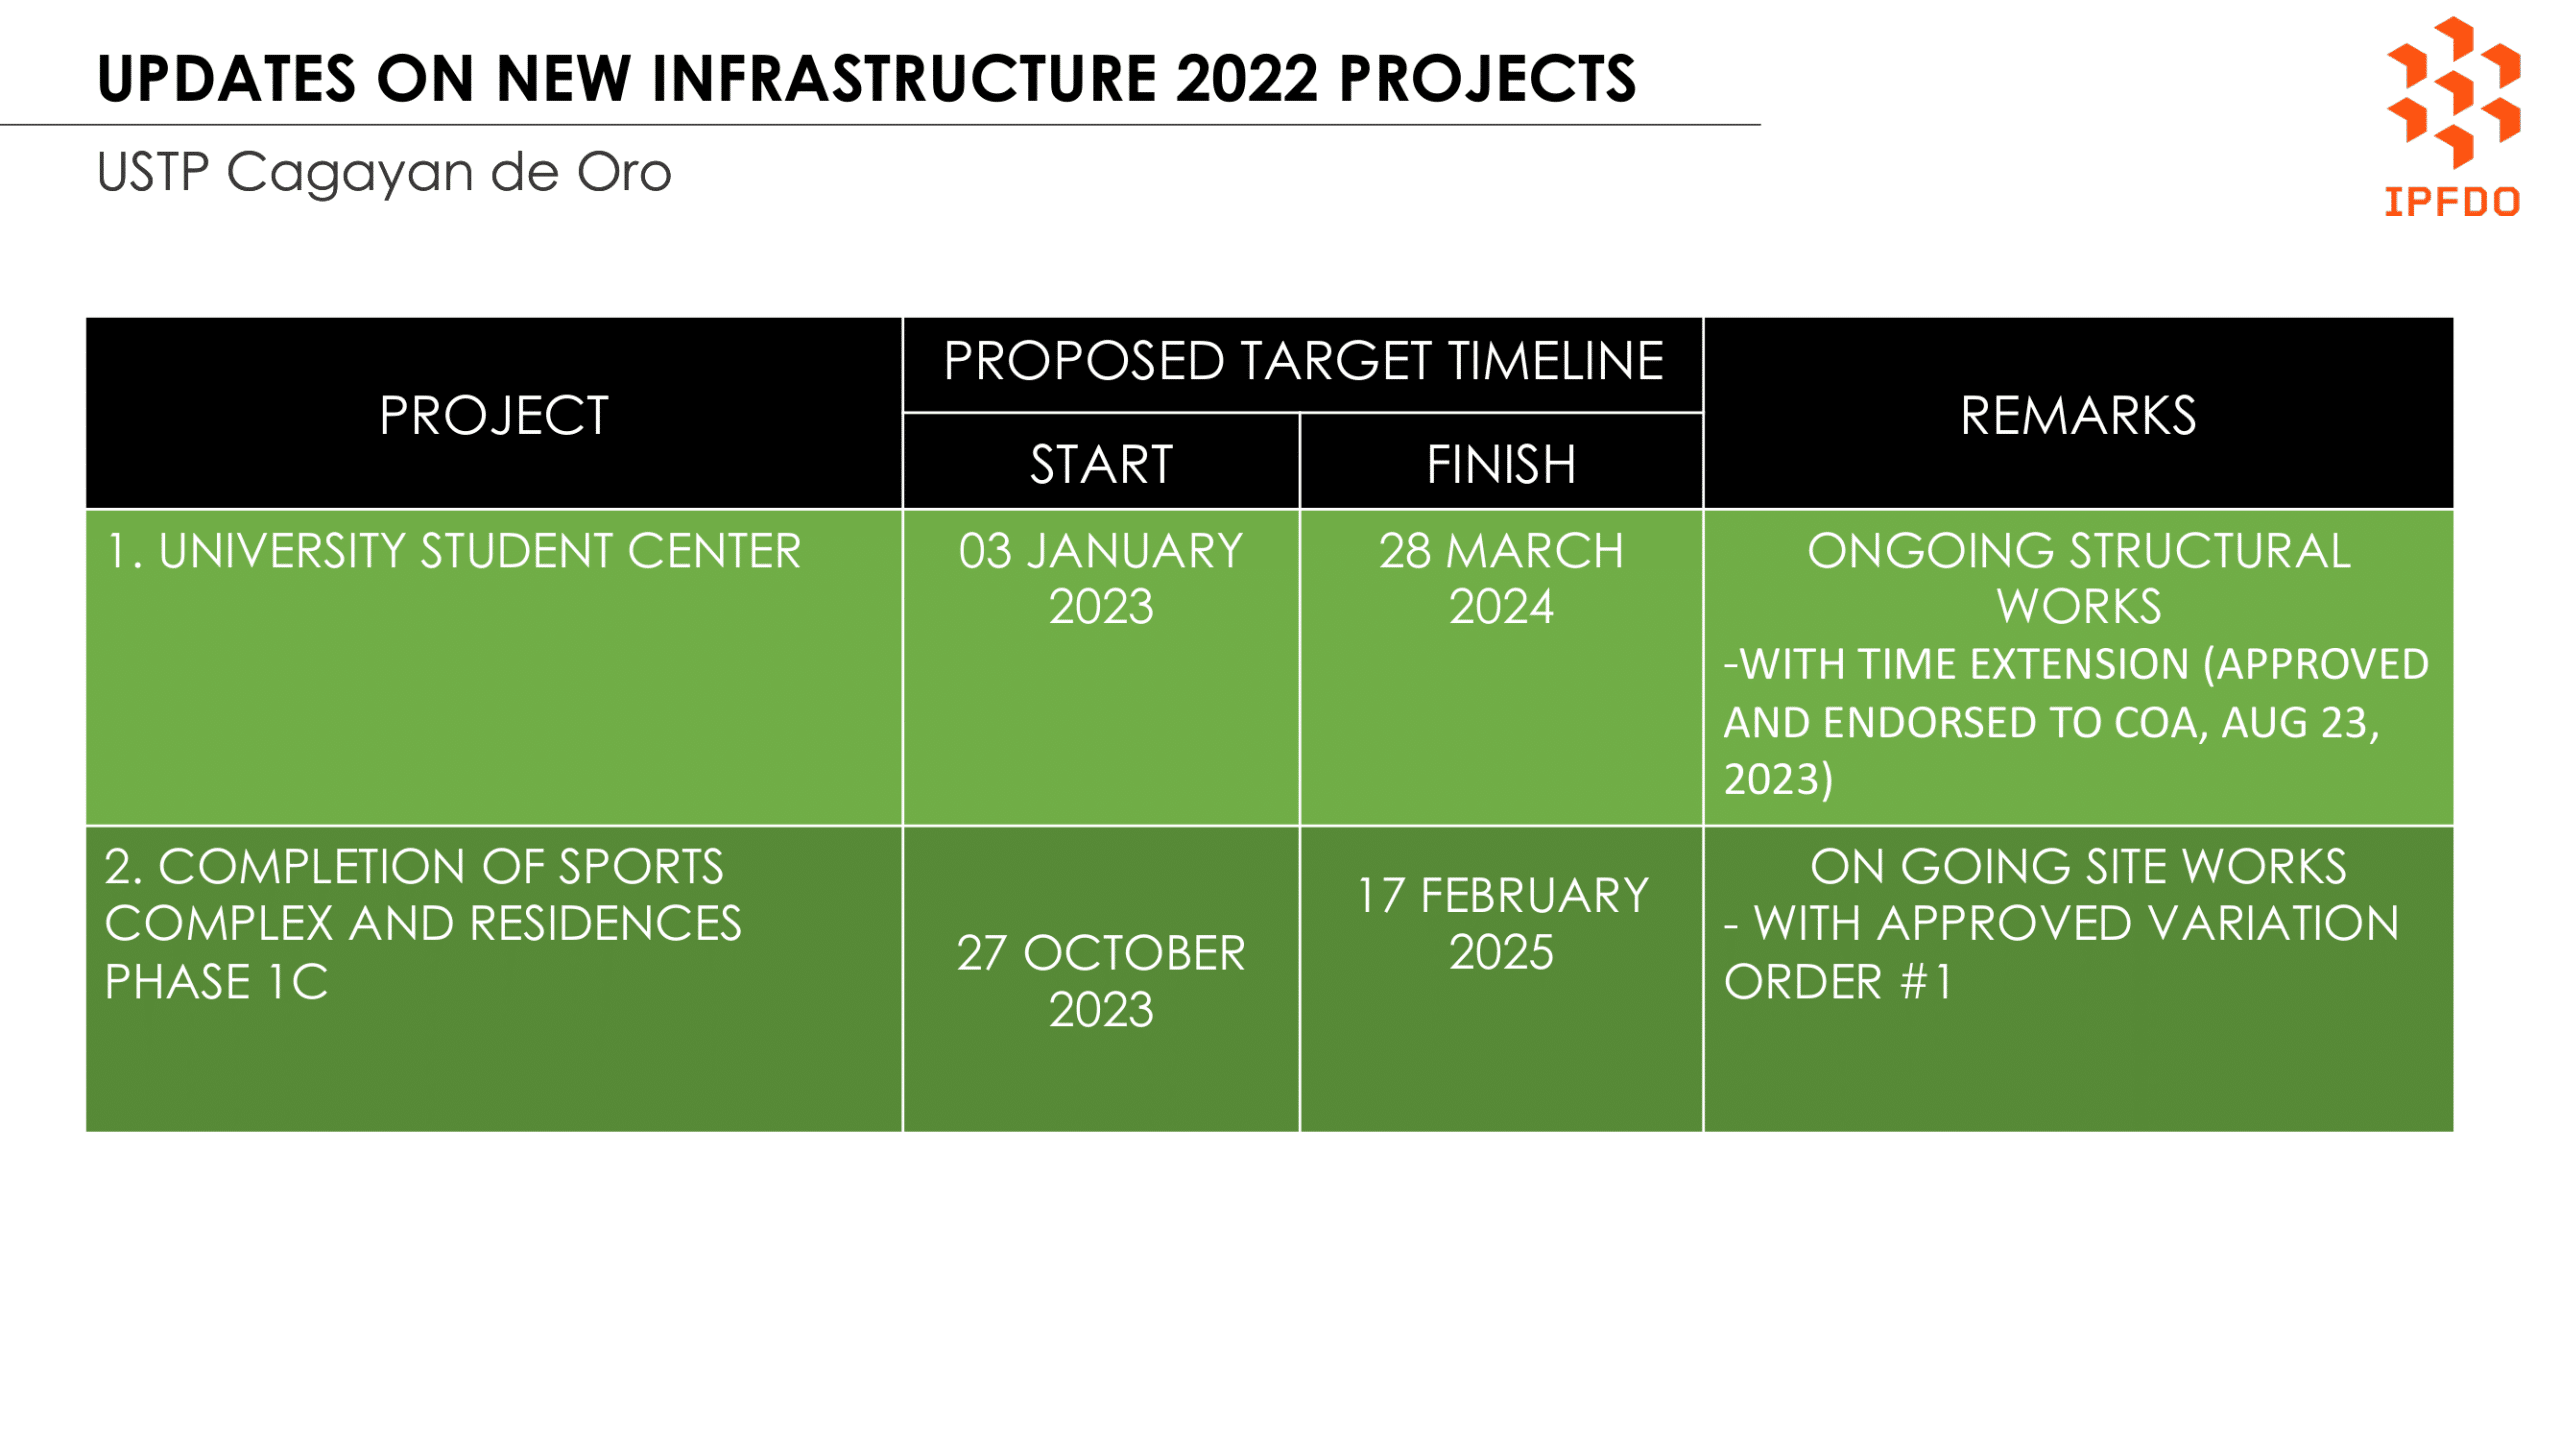 Updates on New Infrastructure 2022 Projects - USTP Cagayan de Oro